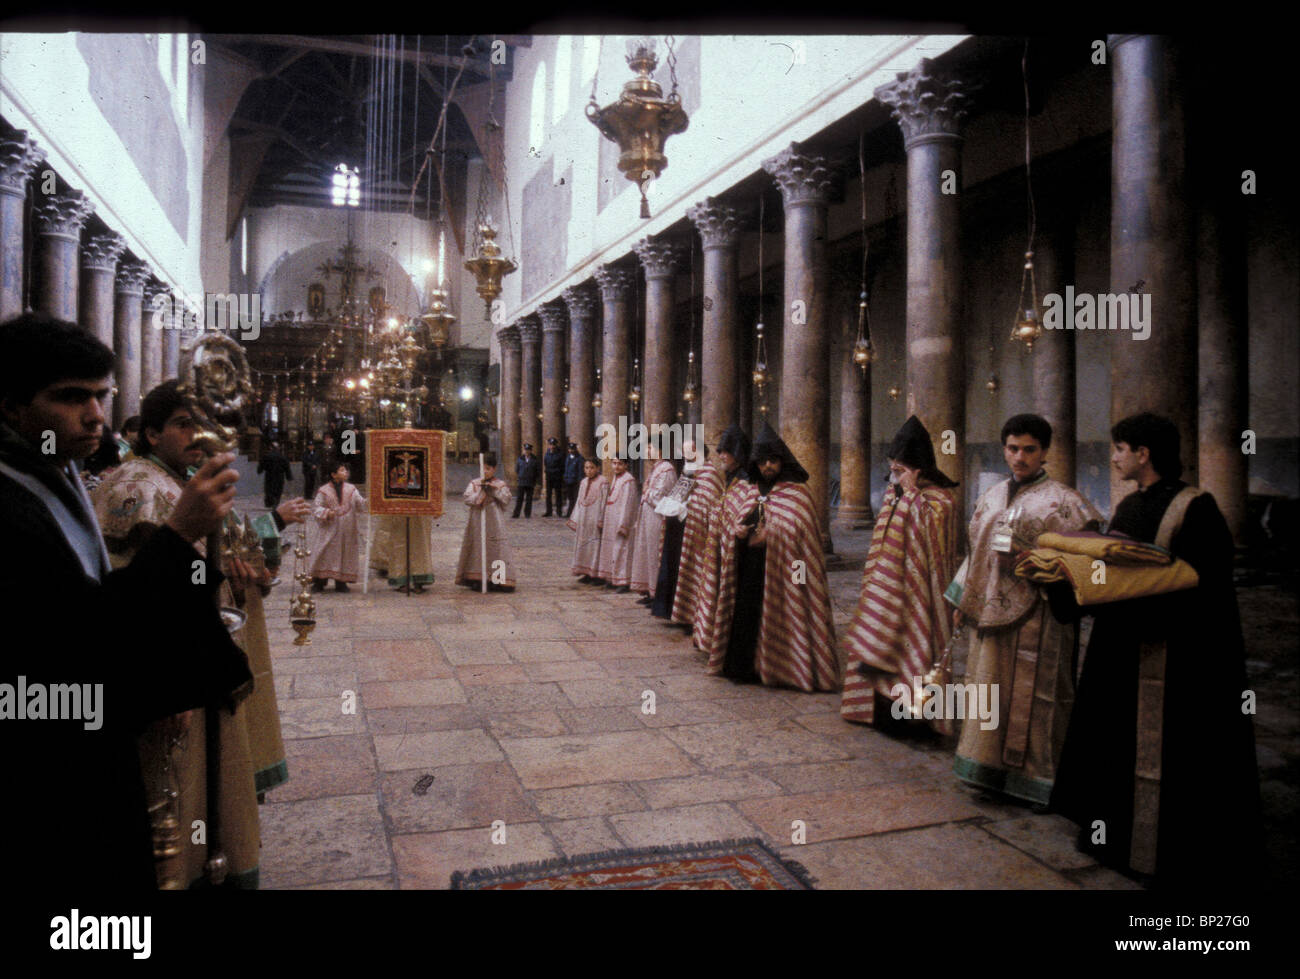 820. CHURCH OF NATIVITY, THE PROCESSION OF THE ARMENIAN-ORTHODOX PATRIARCH IN THE BASILICA OF THE NATIVITY Stock Photo